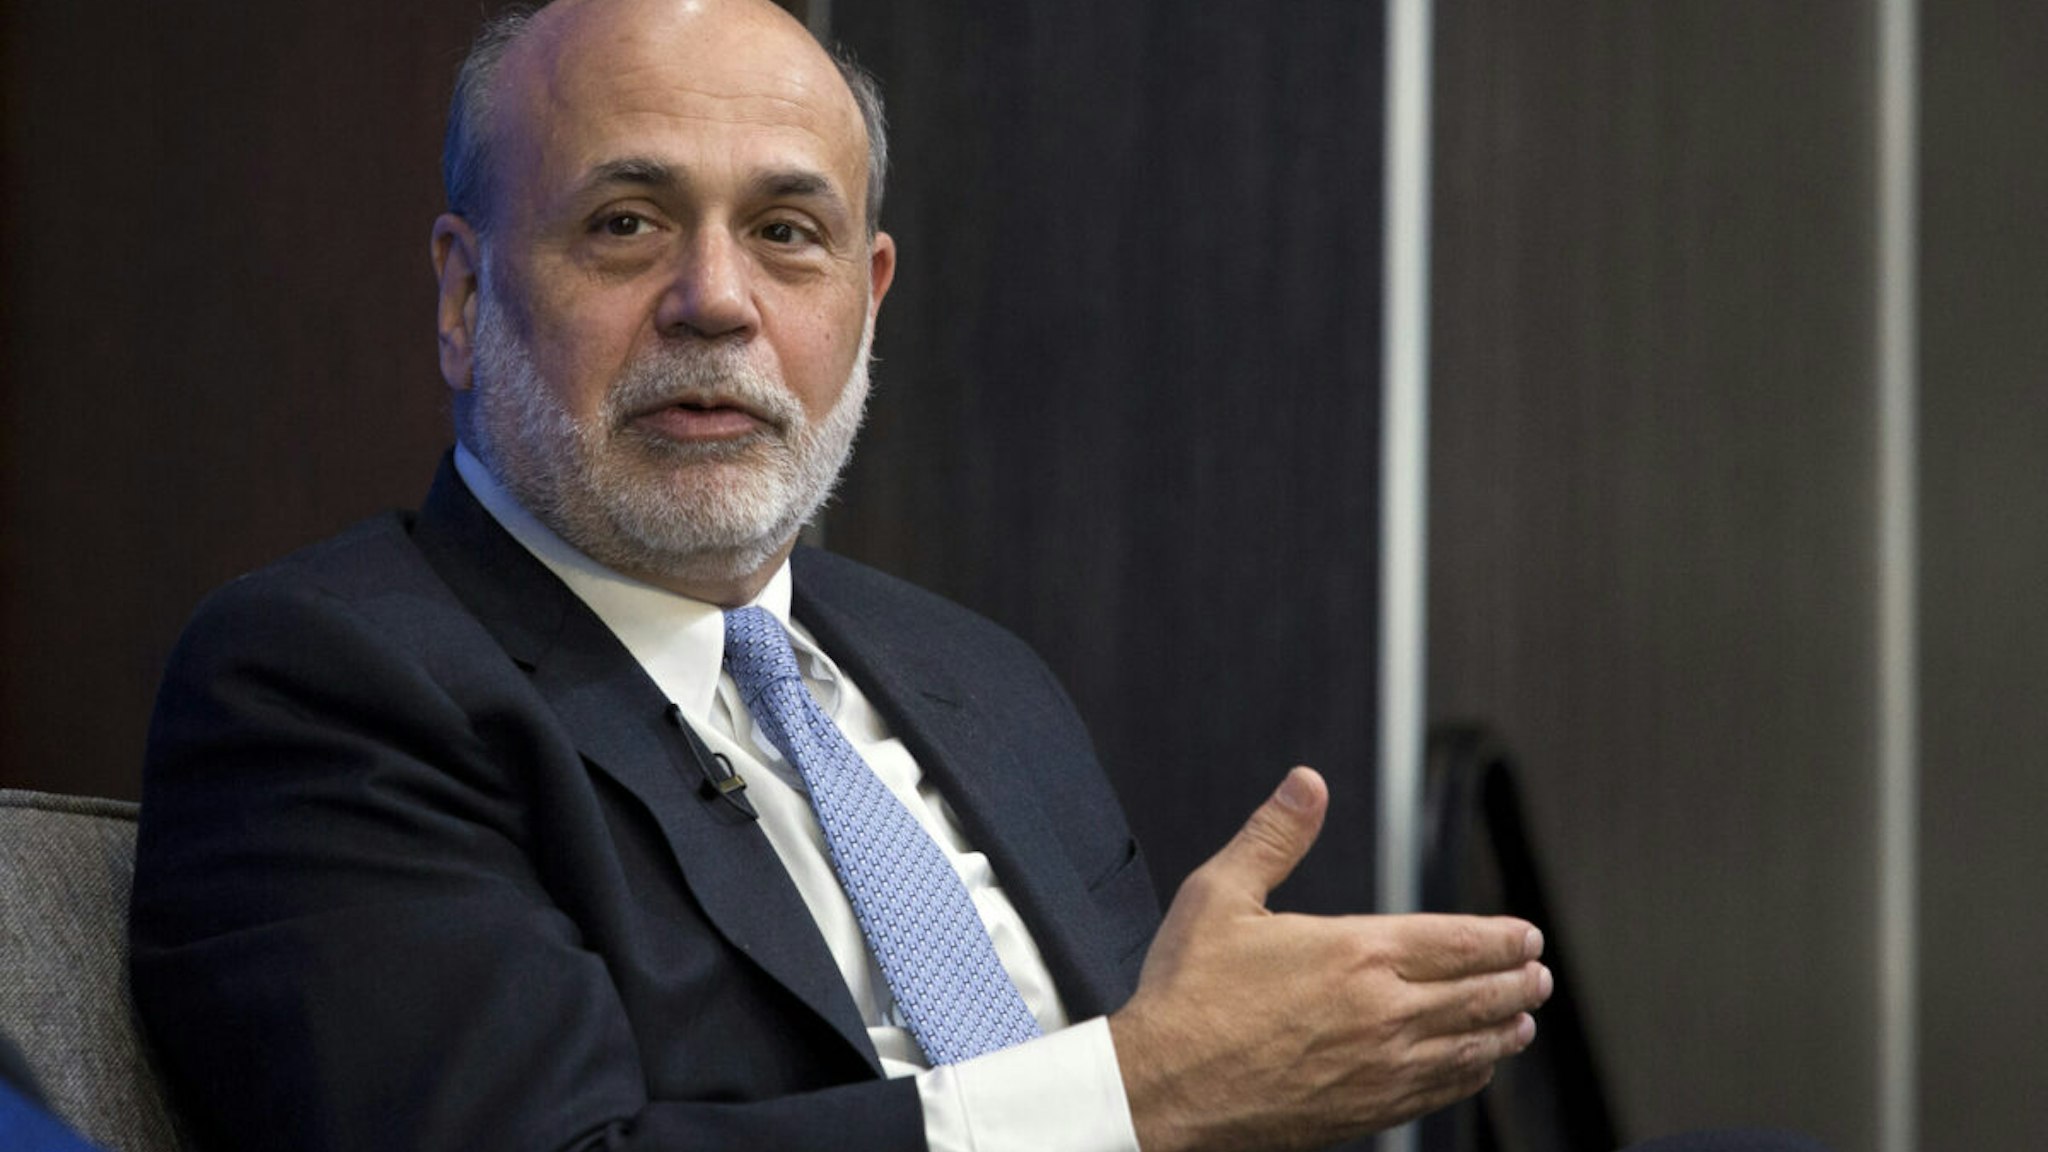 Ben Bernanke, former chairman of the Federal Reserve, speaks during an event with Yi Gang, deputy governor of the People's Bank of China (PBOC), not pictured, at the Brookings Institution in Washington, D.C., U.S., on Thursday, April 14, 2016. Yi said if the U.S. economy grows 2 percent this year he's confident that China's will grow by 6.5 to 7 percent. Photographer: Drew Angerer/Bloomberg via Getty Images